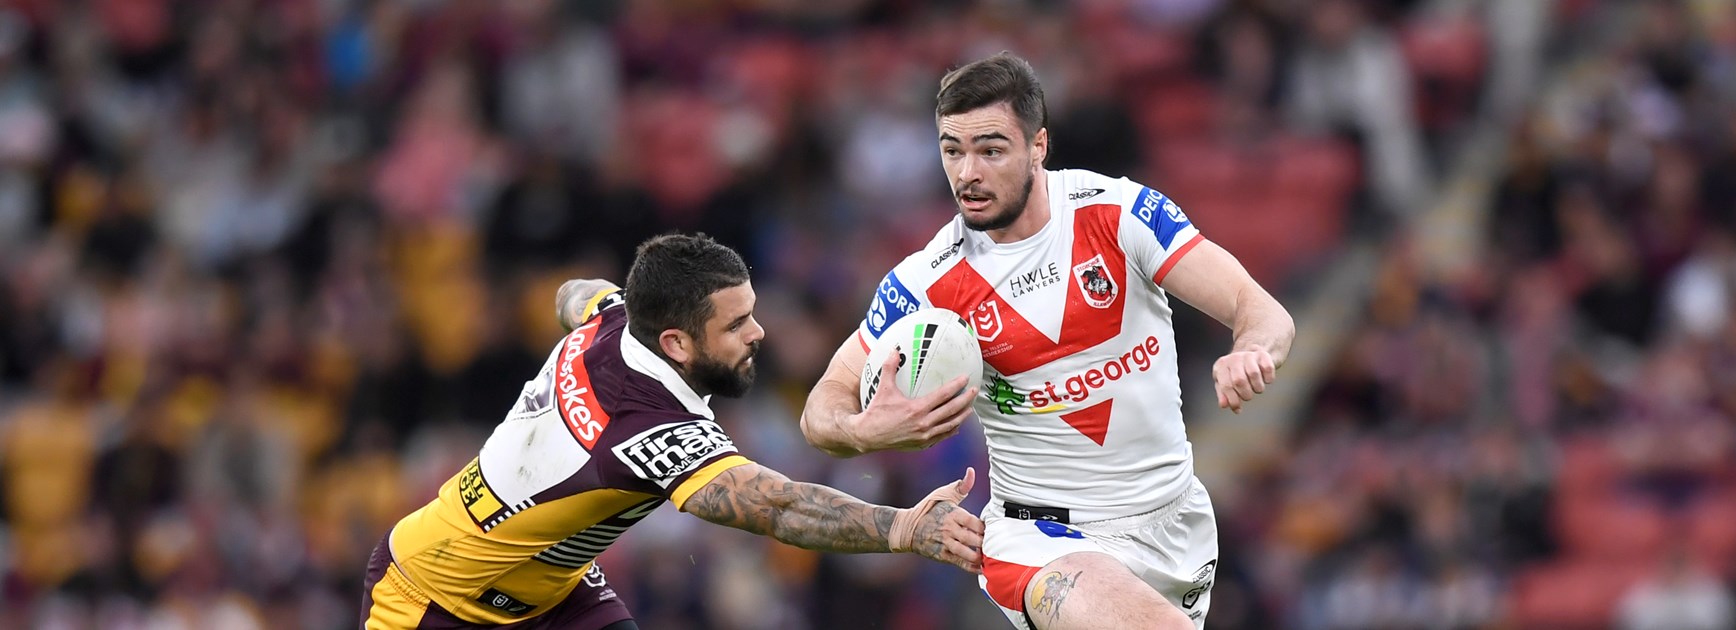 Game day guide: Round 18 v Roosters